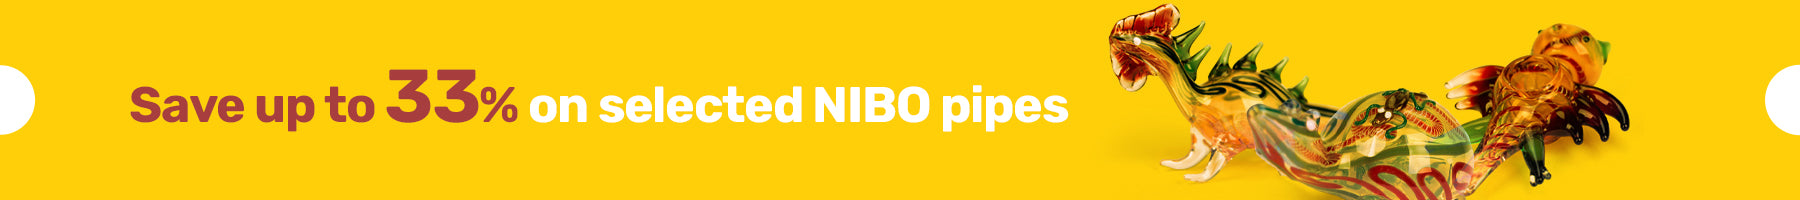 nibo promotion banner